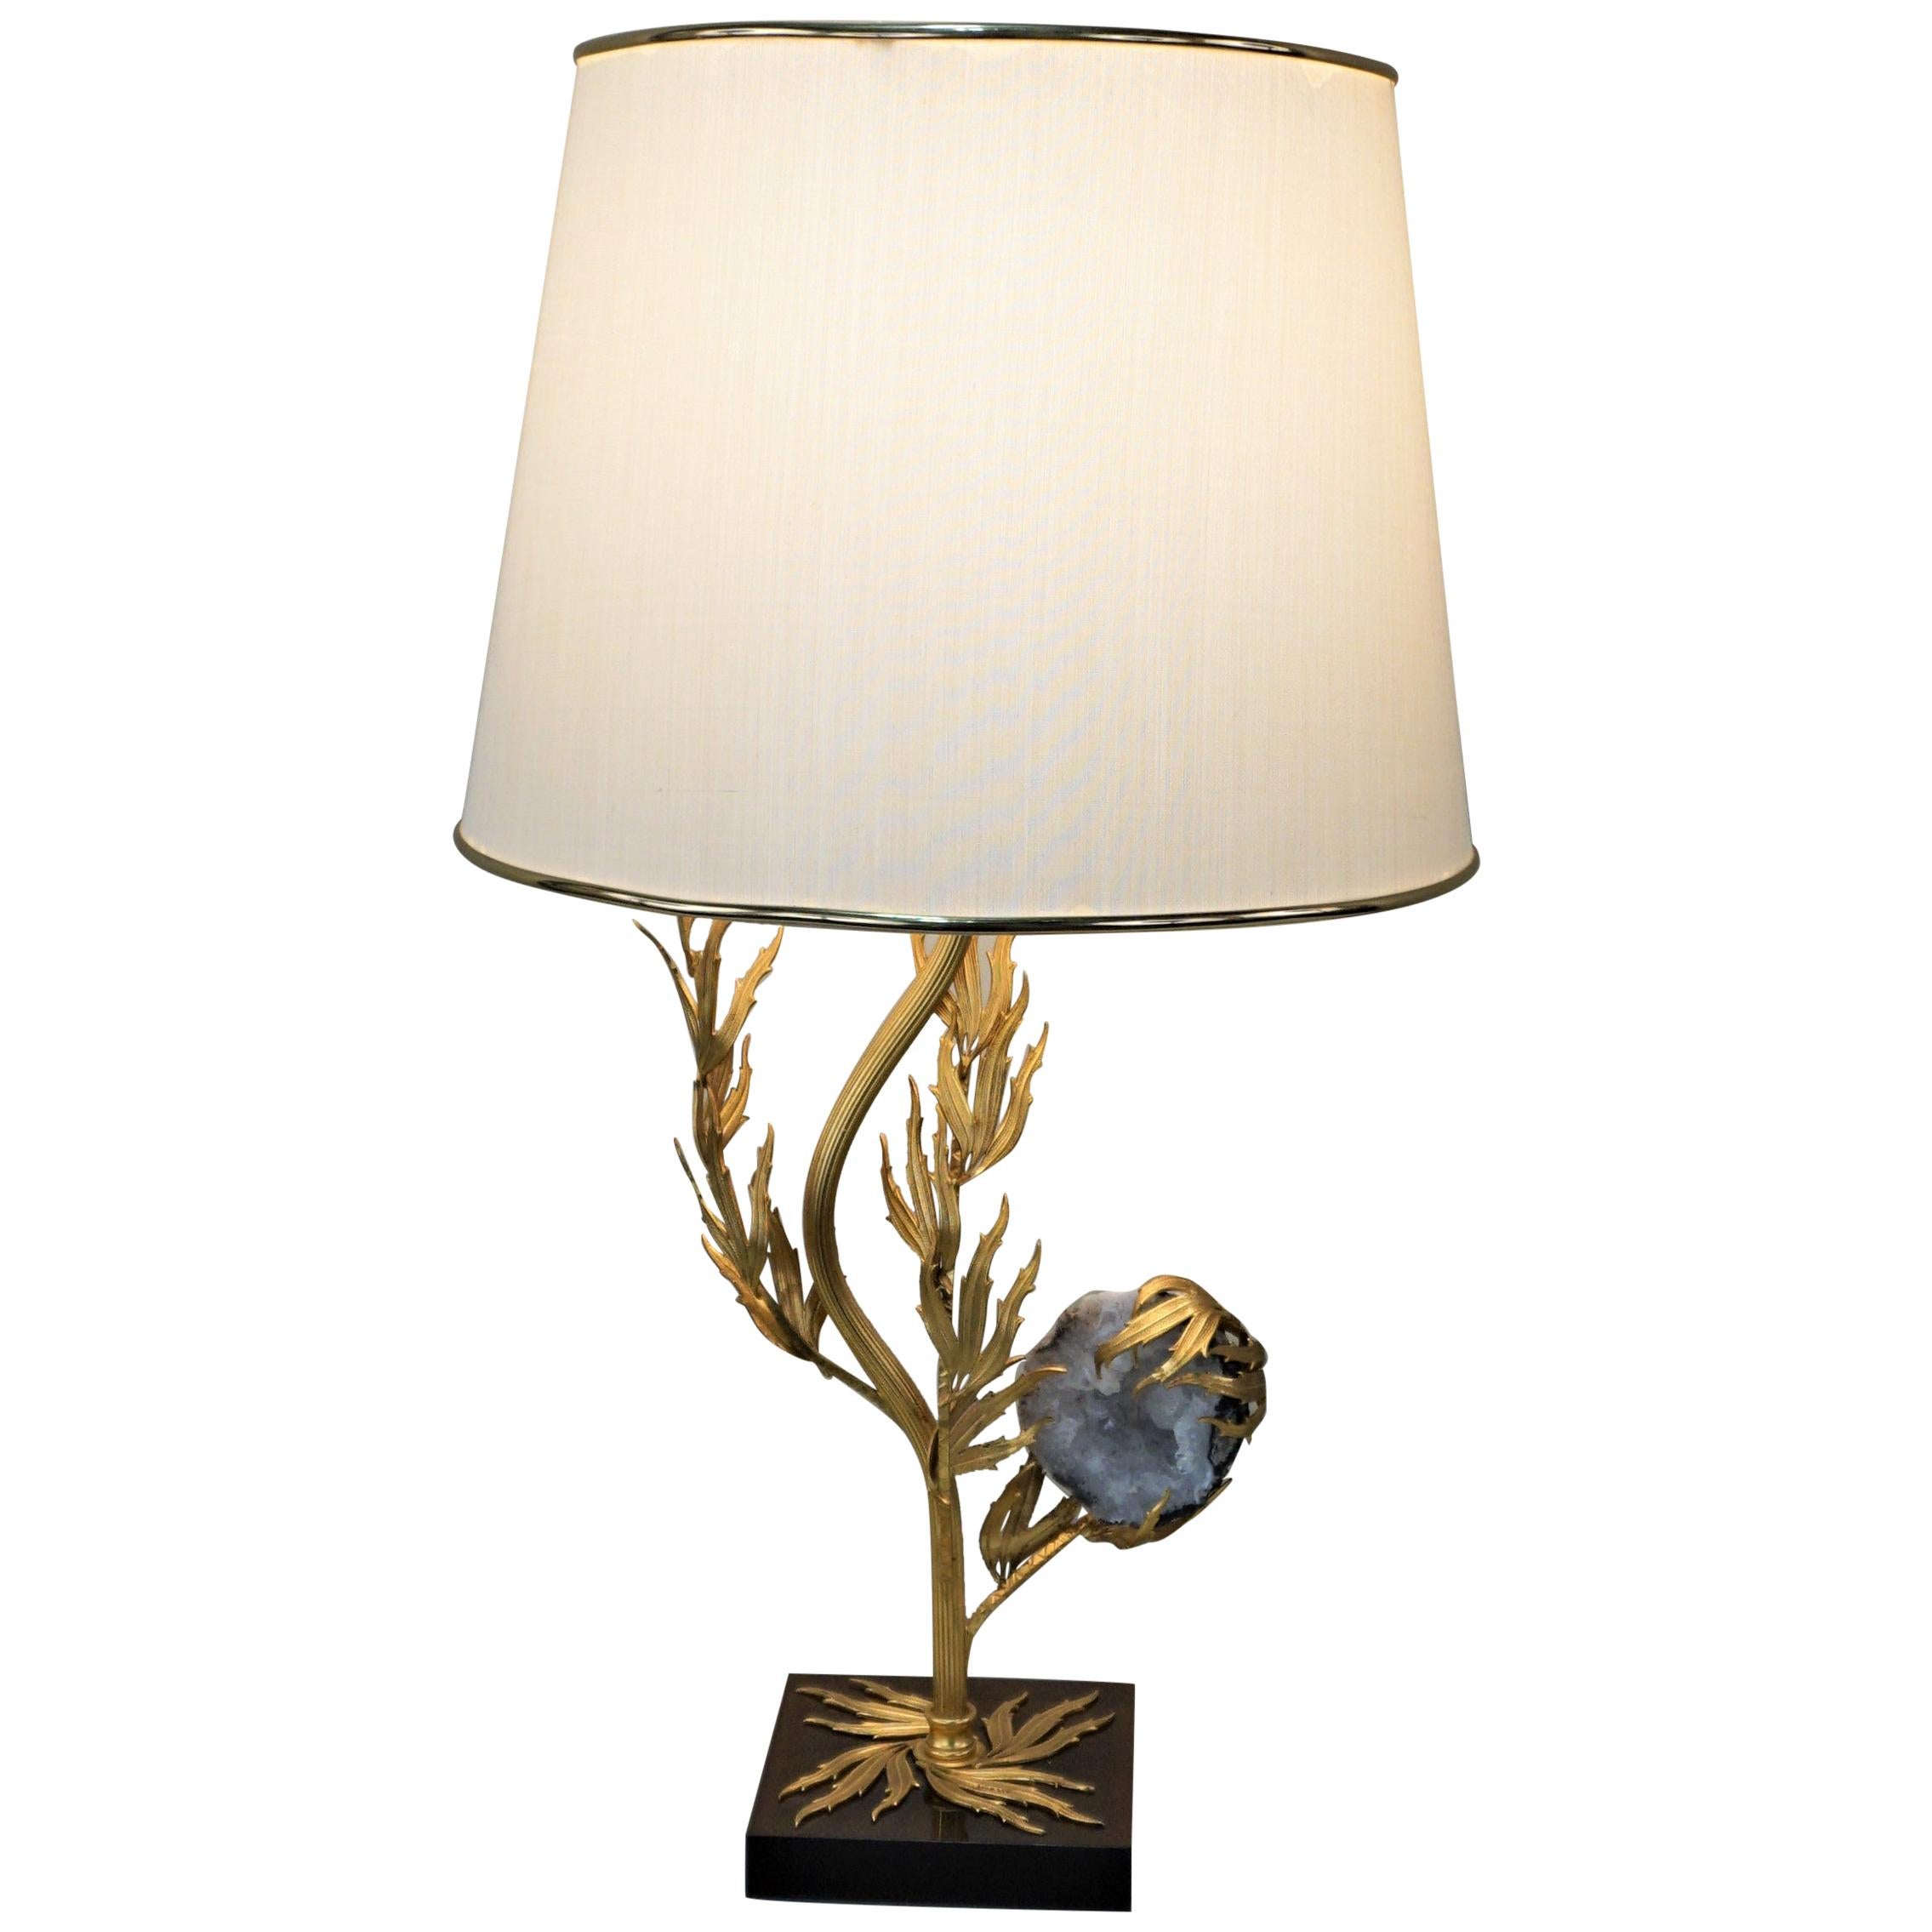 French Gilt Bronze and Celestite 'Crystal' Lamp Attributed to W. Daro, France